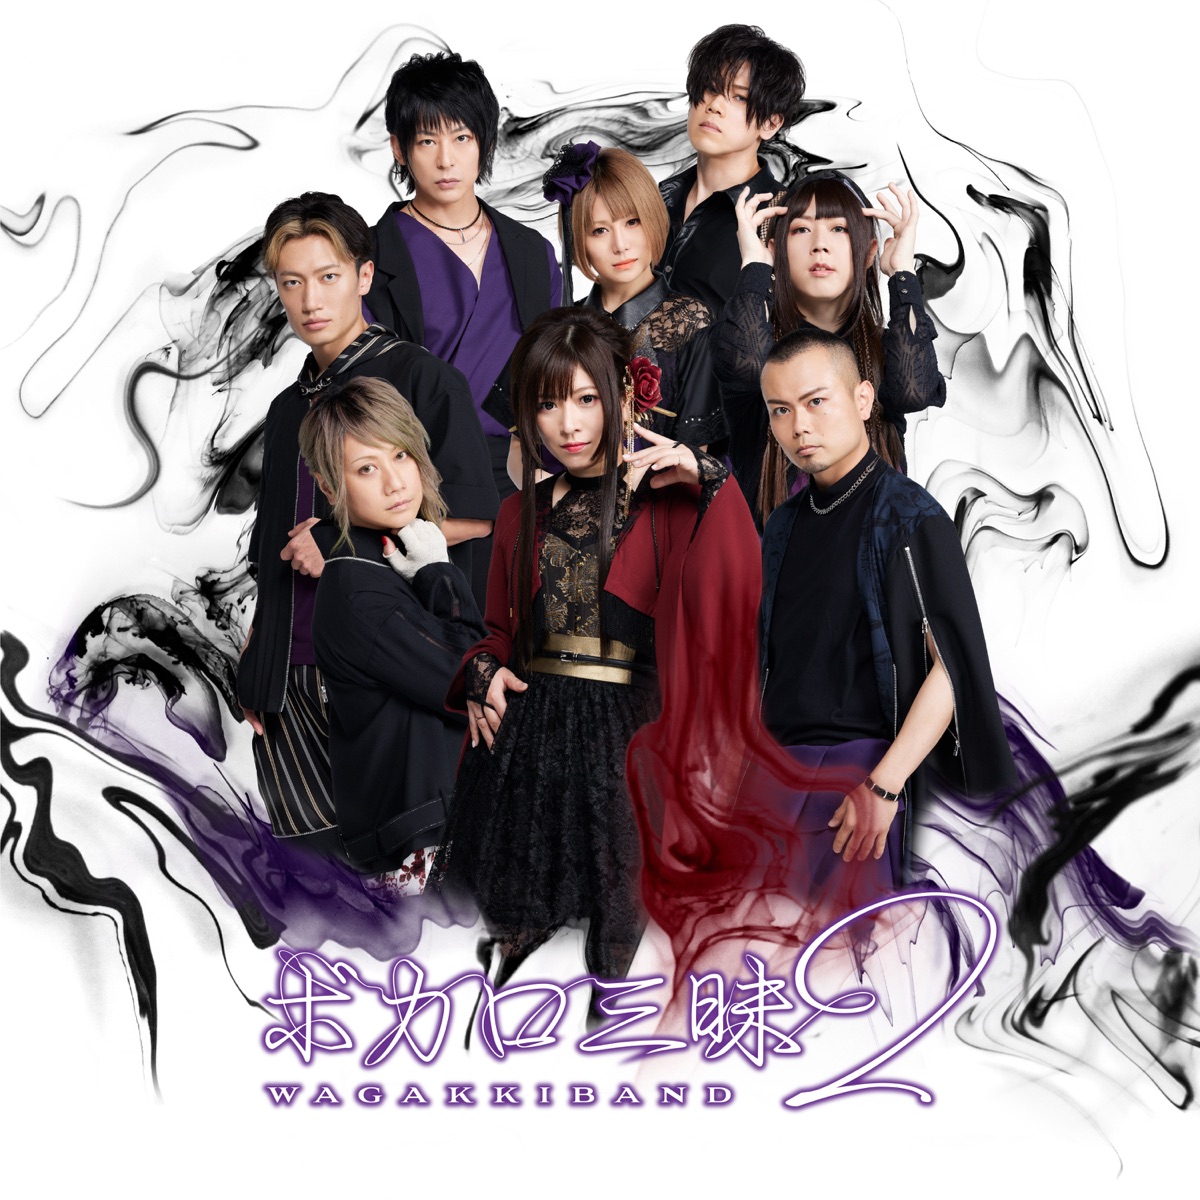 Cover art for『Wagakki Band - ベノム』from the release『Vocalo Zanmai 2